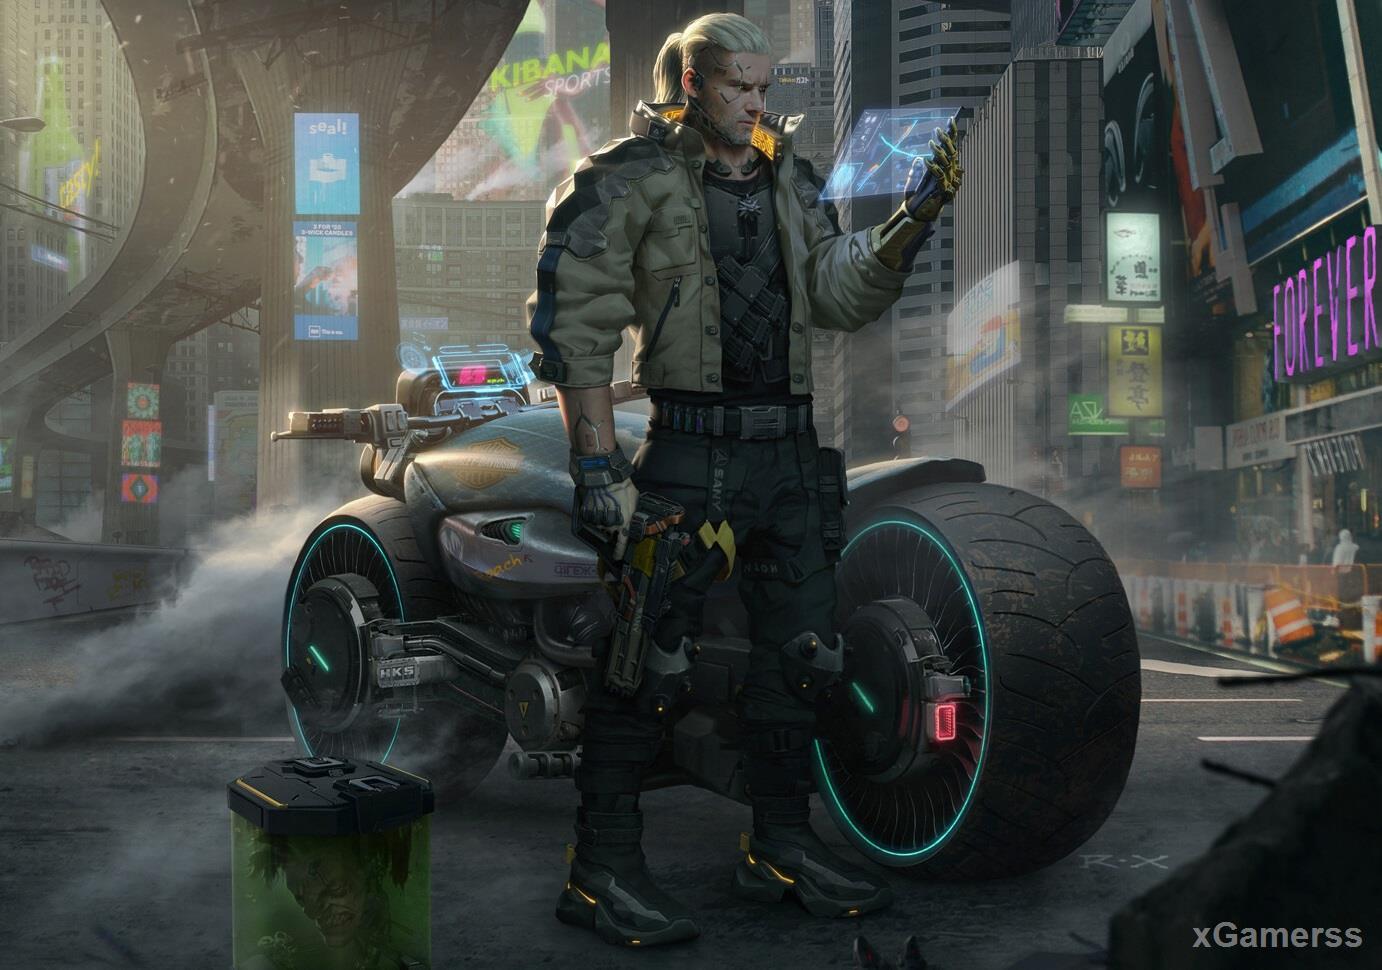 Cyberpunk 2077 is the most anticipated game